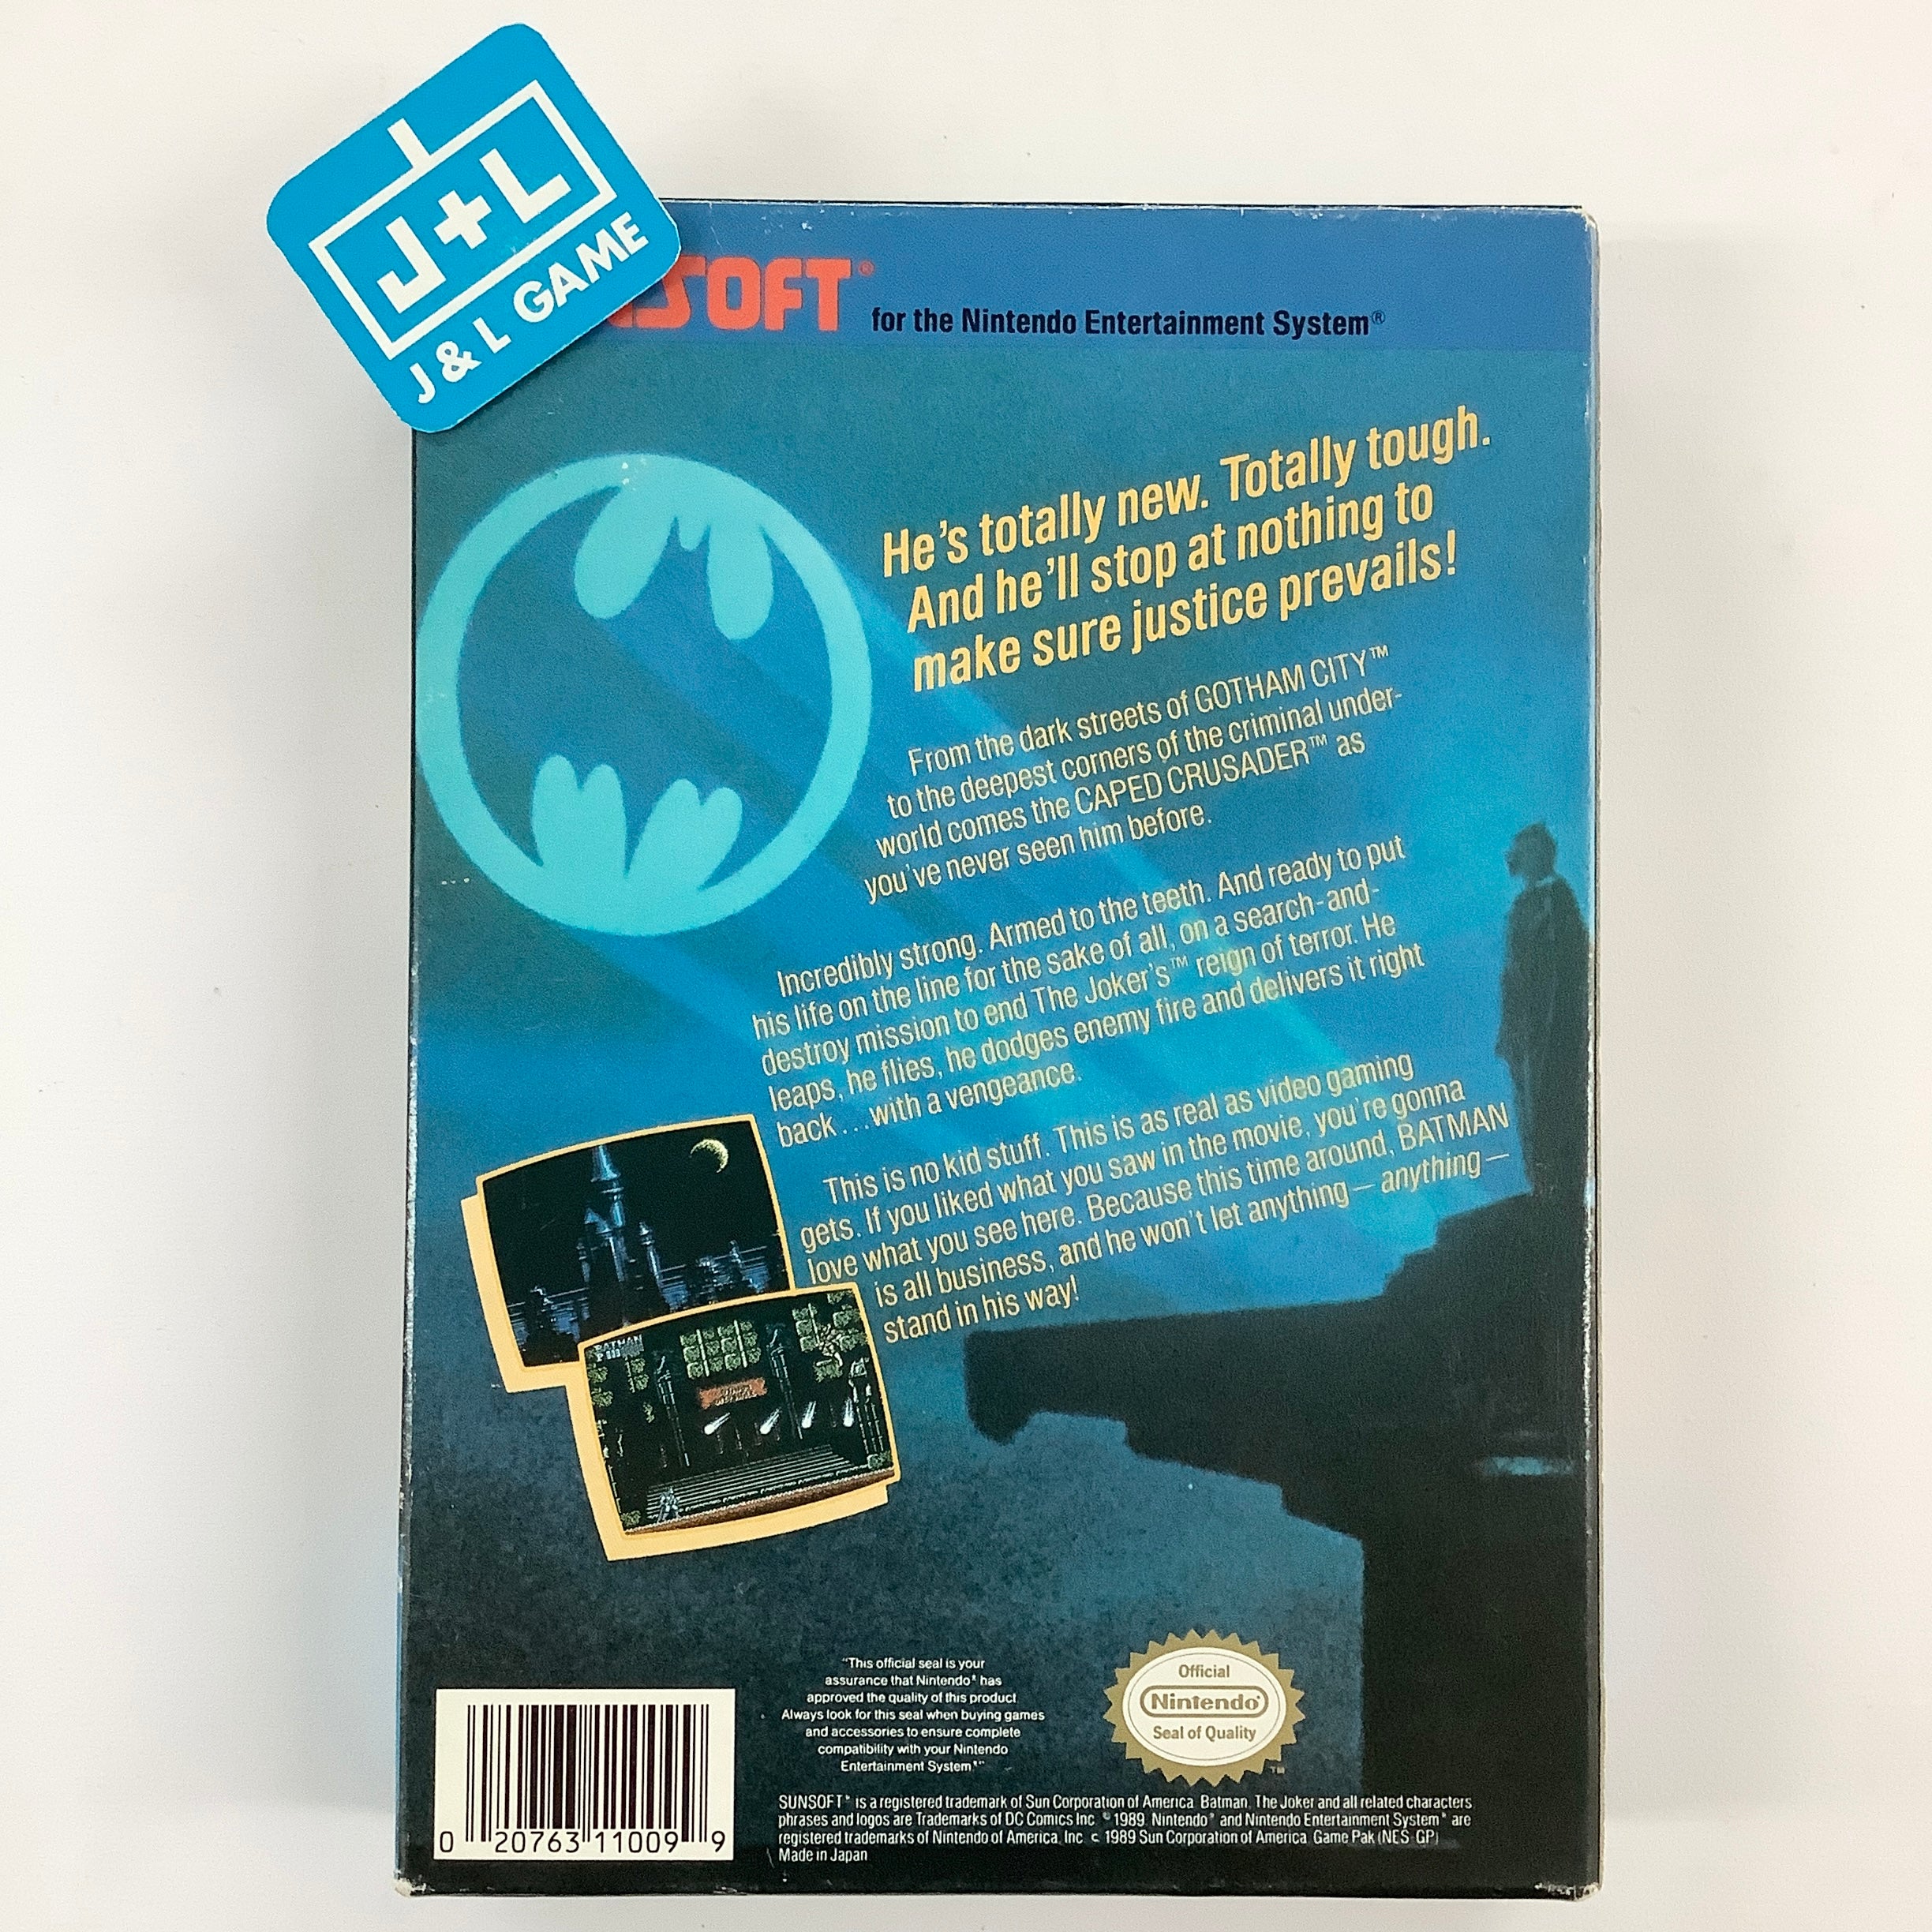 Batman: The Video Game - (NES) Nintendo Entertainment System [Pre-Owned] Video Games Sunsoft   